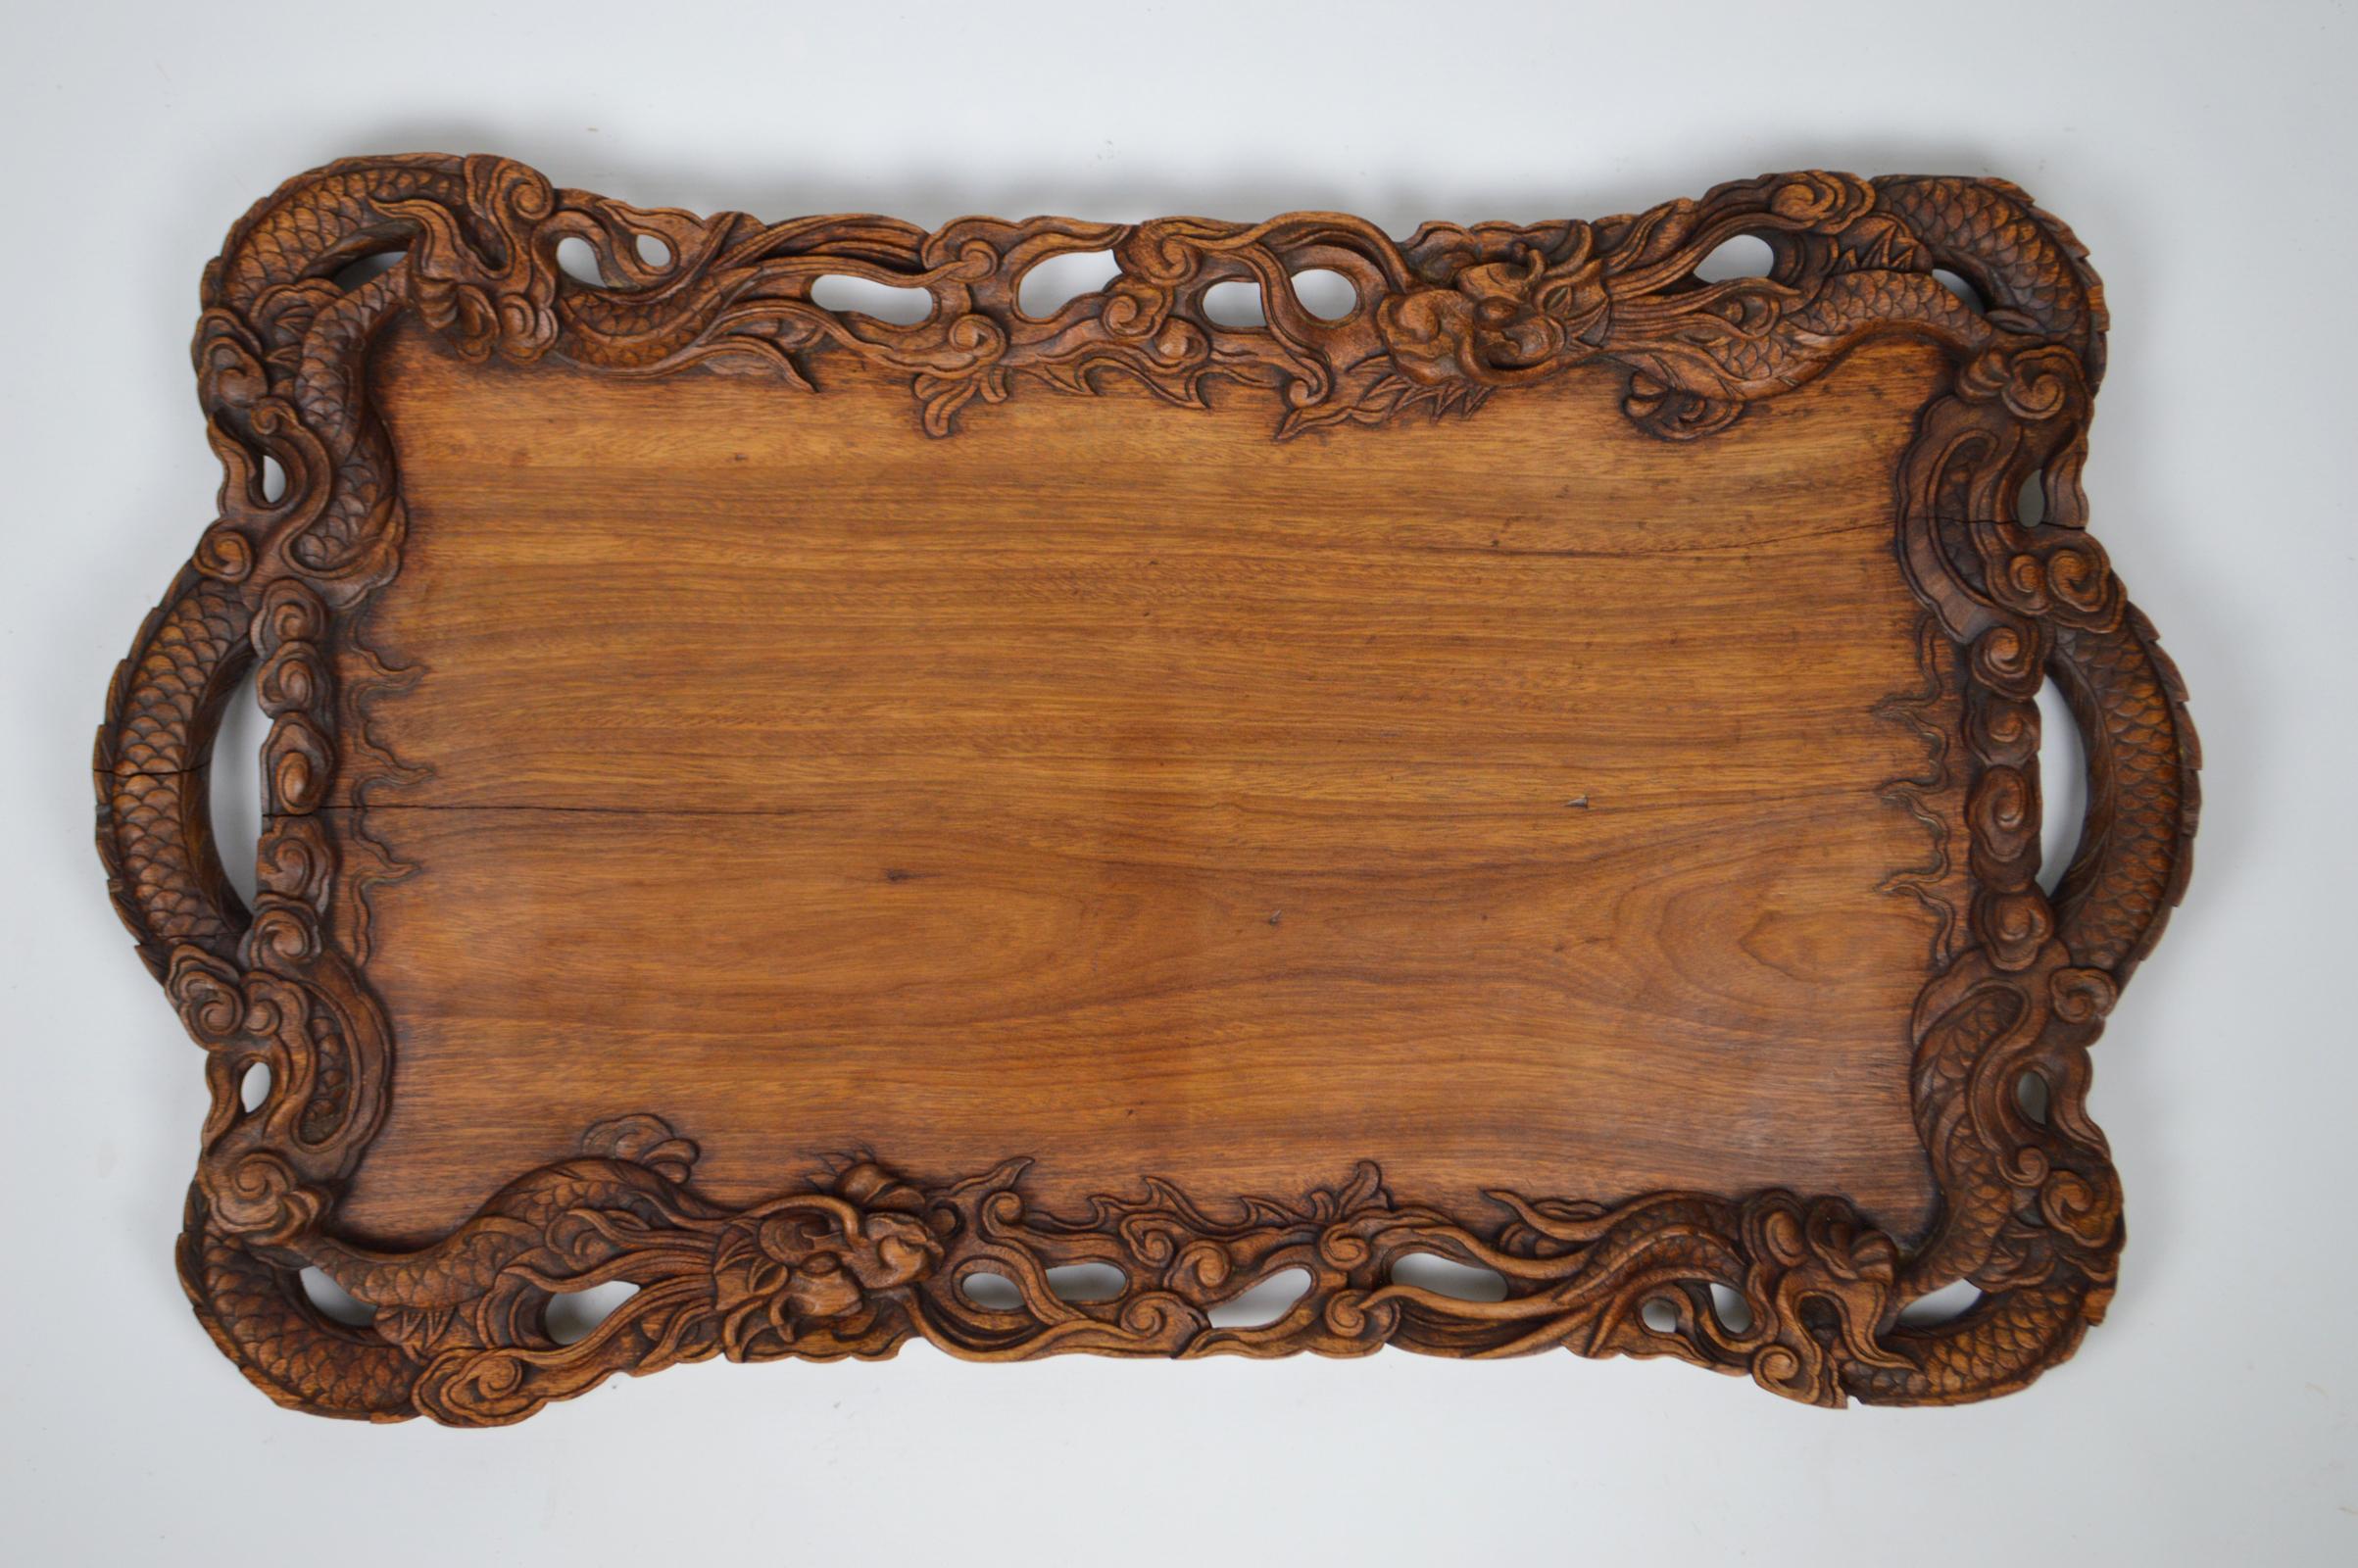 Superb Indochinese table / serving tray in carved wood.

Very elaborate sculpture with a mythological theme (dragons).
Good manufacturing quality.

Asia, French Indochina (Vietnam), circa 1900.

In good condition.

Dimensions:
Height 61 cm
Width 37